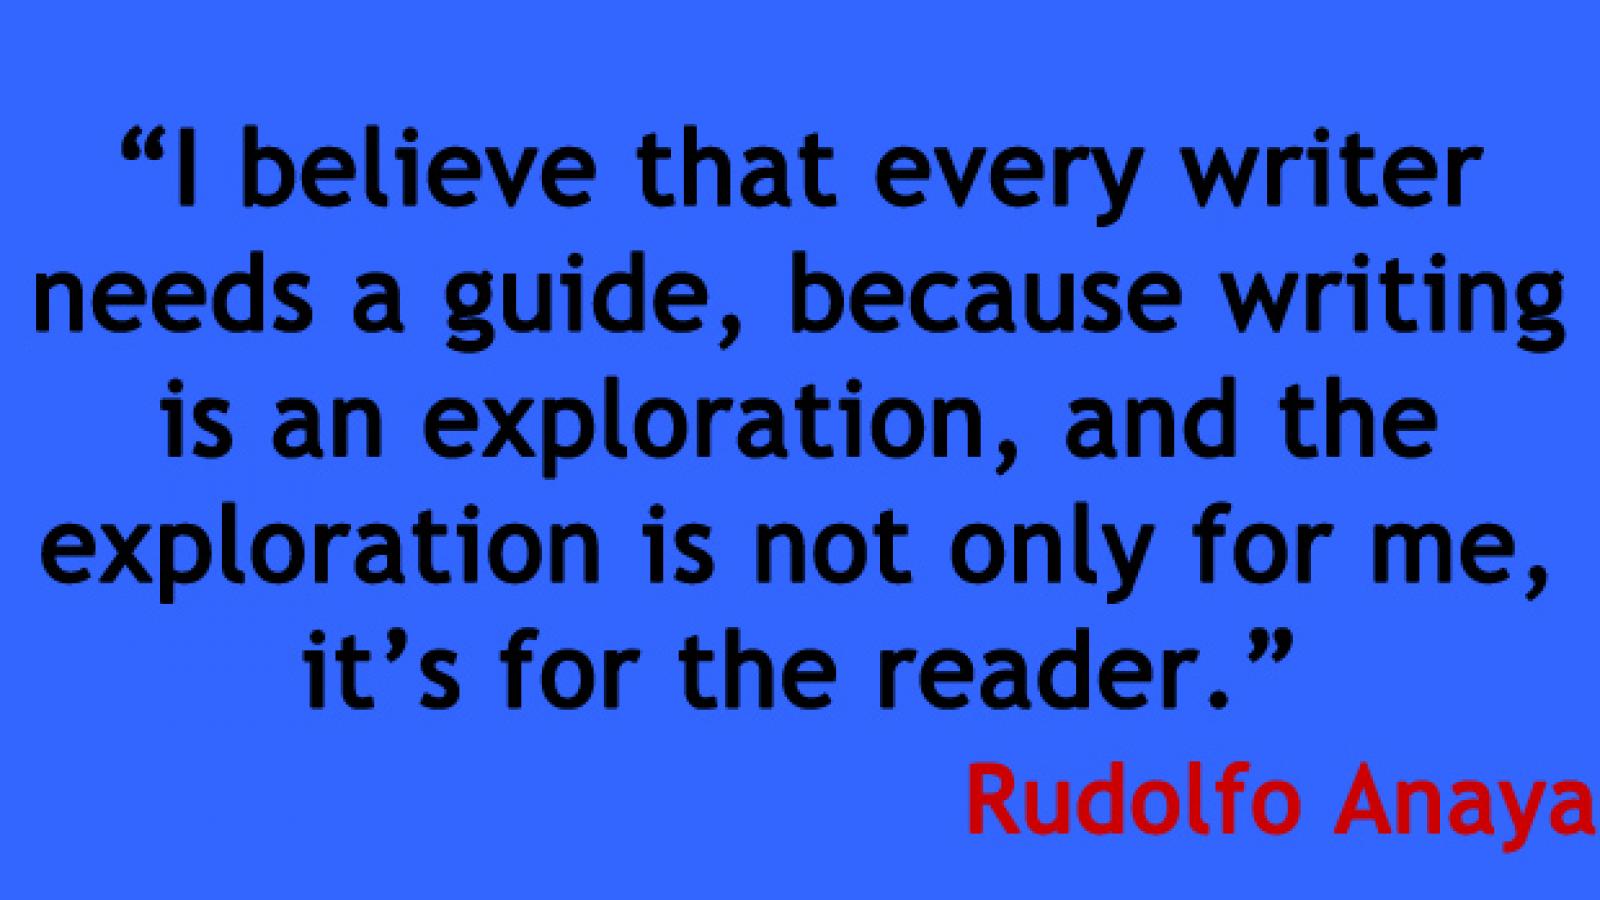 Image of a quote by Rudolfo Anaya that says I believe that every writer needs a quite, because writing is an exploration, and the exploration is not only for me, it's  for the reader.